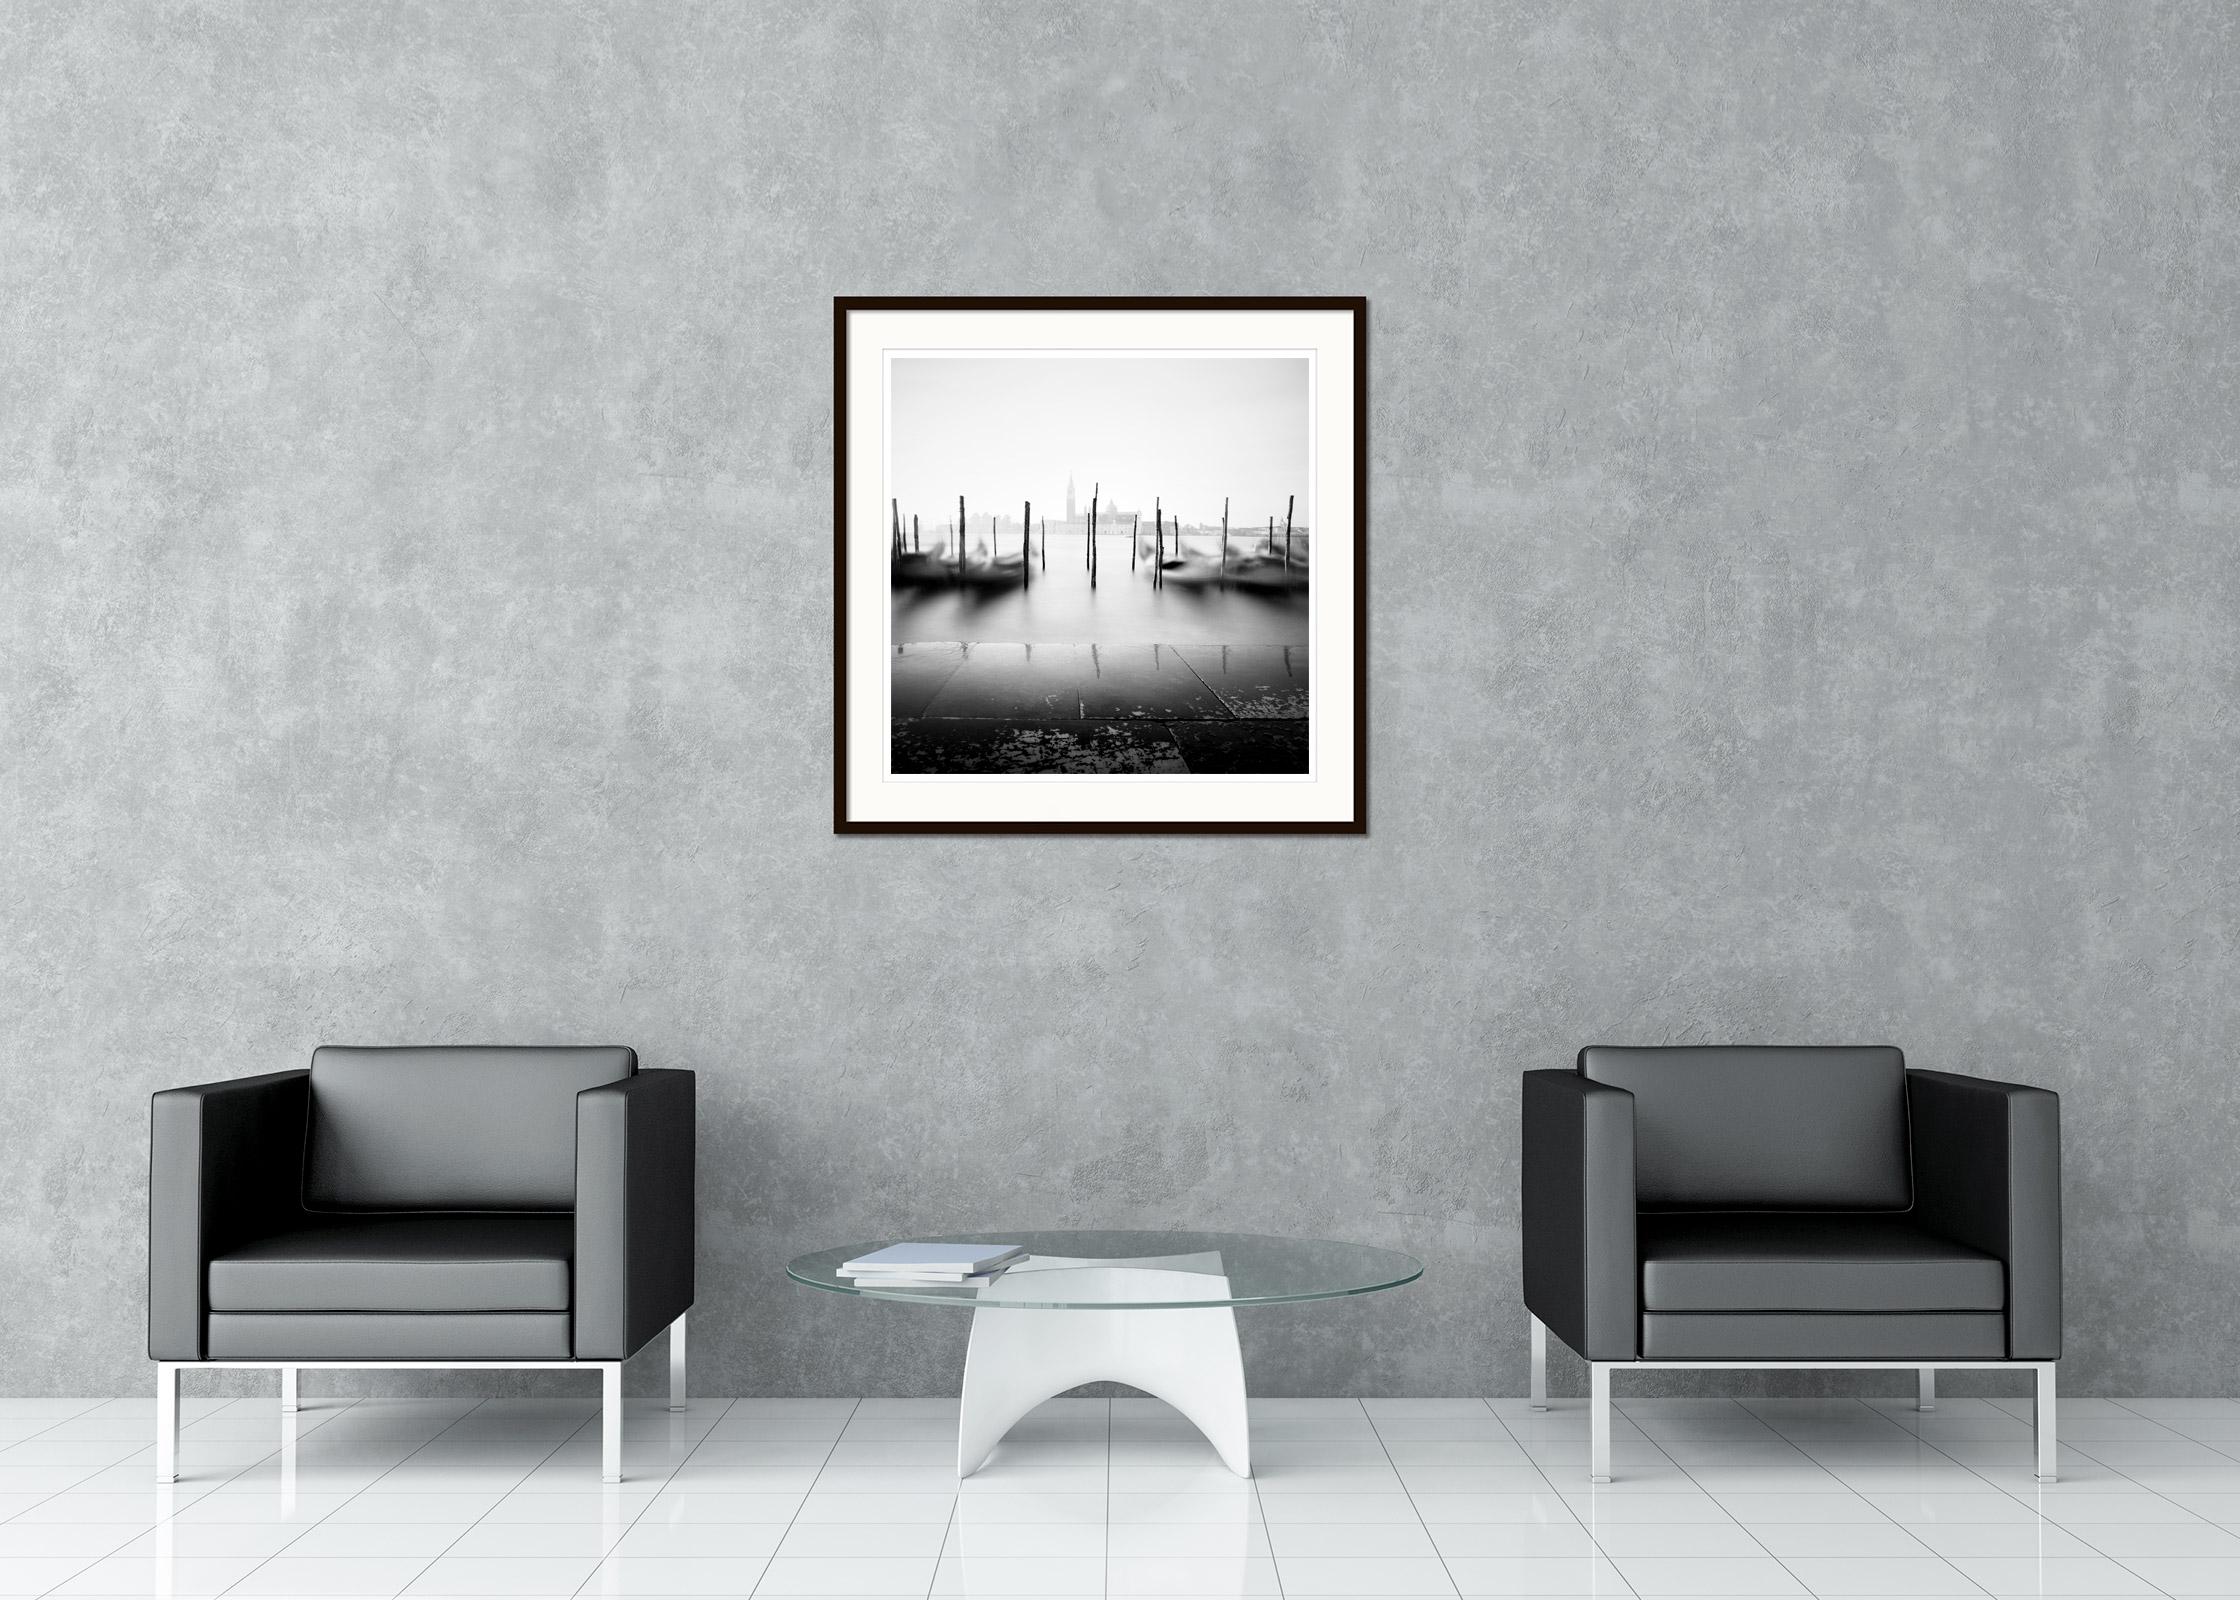 Black and white fine art long exposure cityscape - landscape photography. Archival pigment ink print, edition of 9. Signed, titled, dated and numbered by artist. Certificate of authenticity included. Printed with 4cm white border.
International